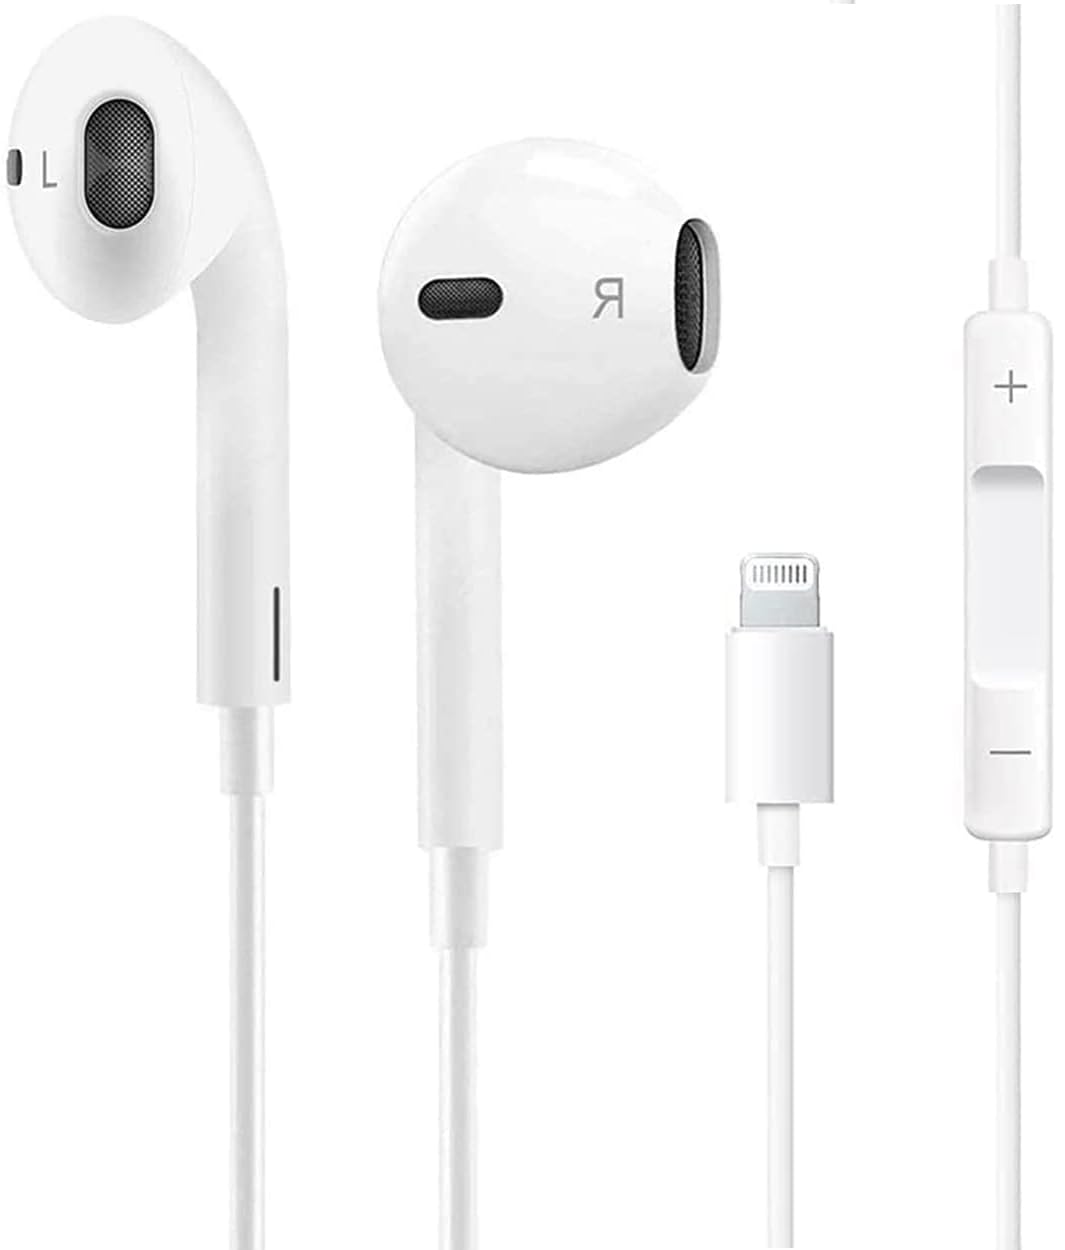 Headphones for iPhone Wired Stereo Sound,Earbuds with Microphone and Volume Control,Isolation Noise Compatible with iPhone 14/13/12/11/7/8/8plus X/Xs/XR/Xs max/pro/se, Supports All iOS Systems